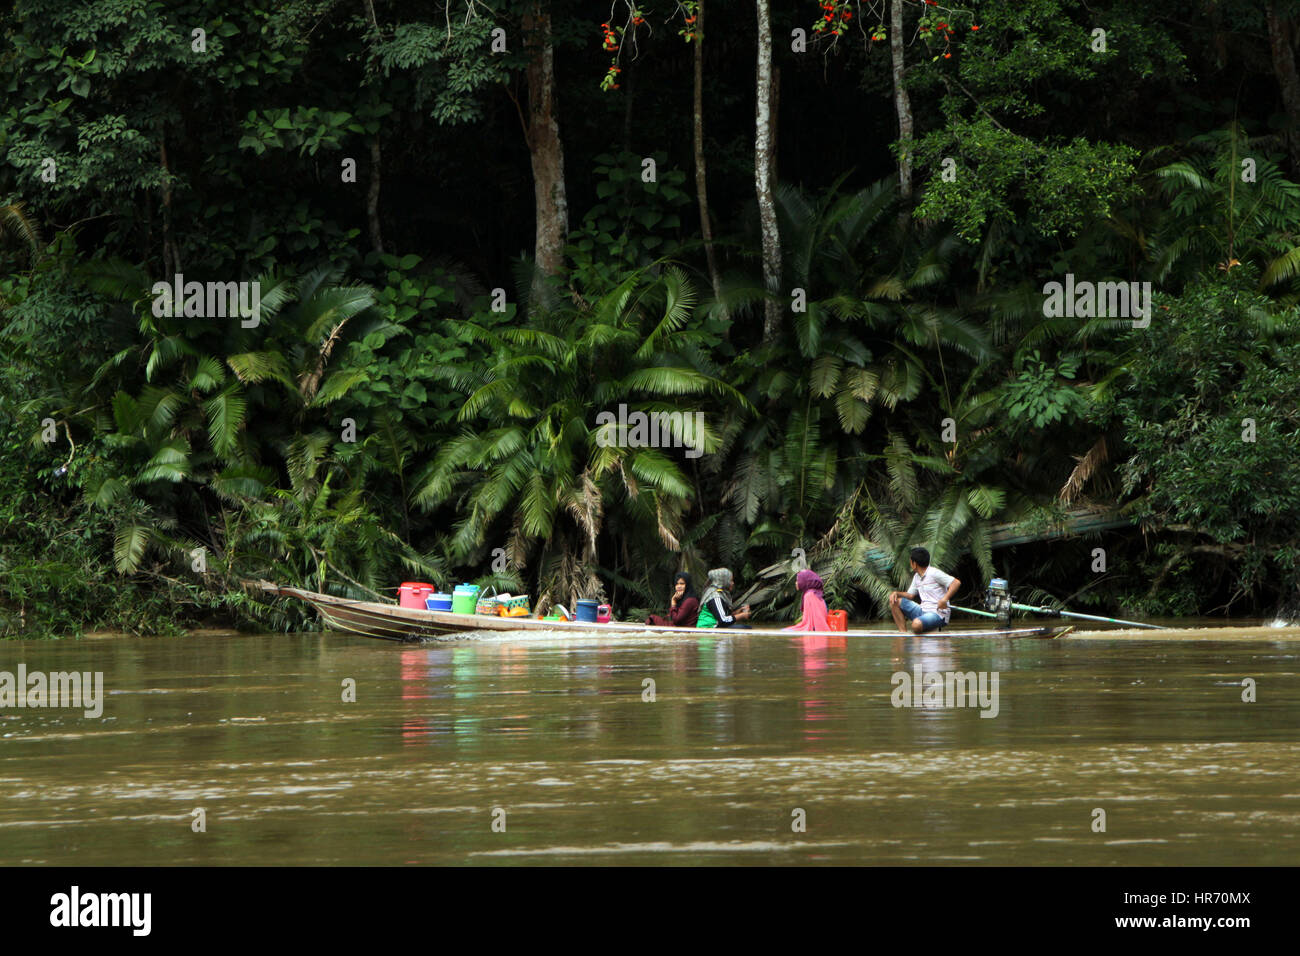 Rimba Baling, Riau, Indonesia. 26th Feb, 2017. RIAU, INDONESIA - FEBRUARY 26 : Residents used boats through the Subayang river subayang at Rimba Baling National Park on February 26, 2017 in Riau, Indonesia. Rimba Baling national park is tropical rain forest with an area of 500,000 hectares with Sumatran tiger, Sumatra bear, Raflesia flower and others. Credit: Sijori Images/ZUMA Wire/Alamy Live News Stock Photo